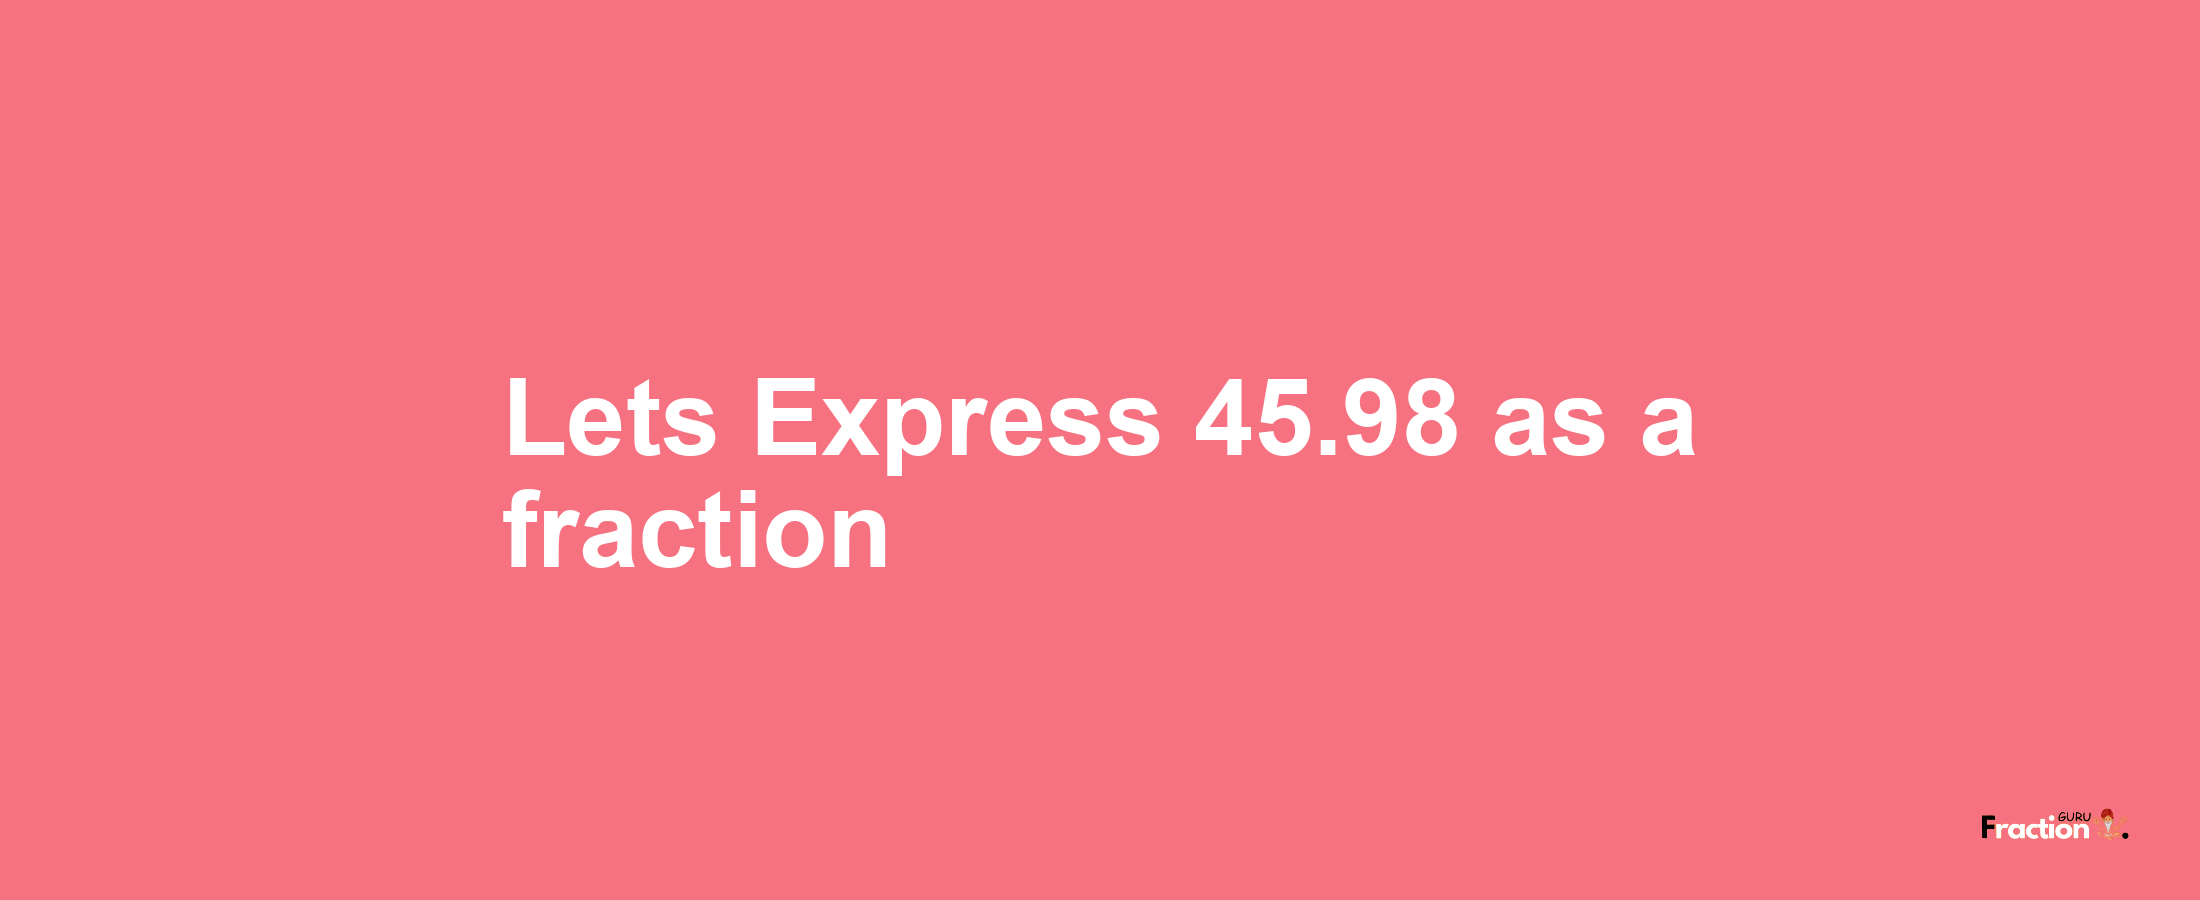 Lets Express 45.98 as afraction